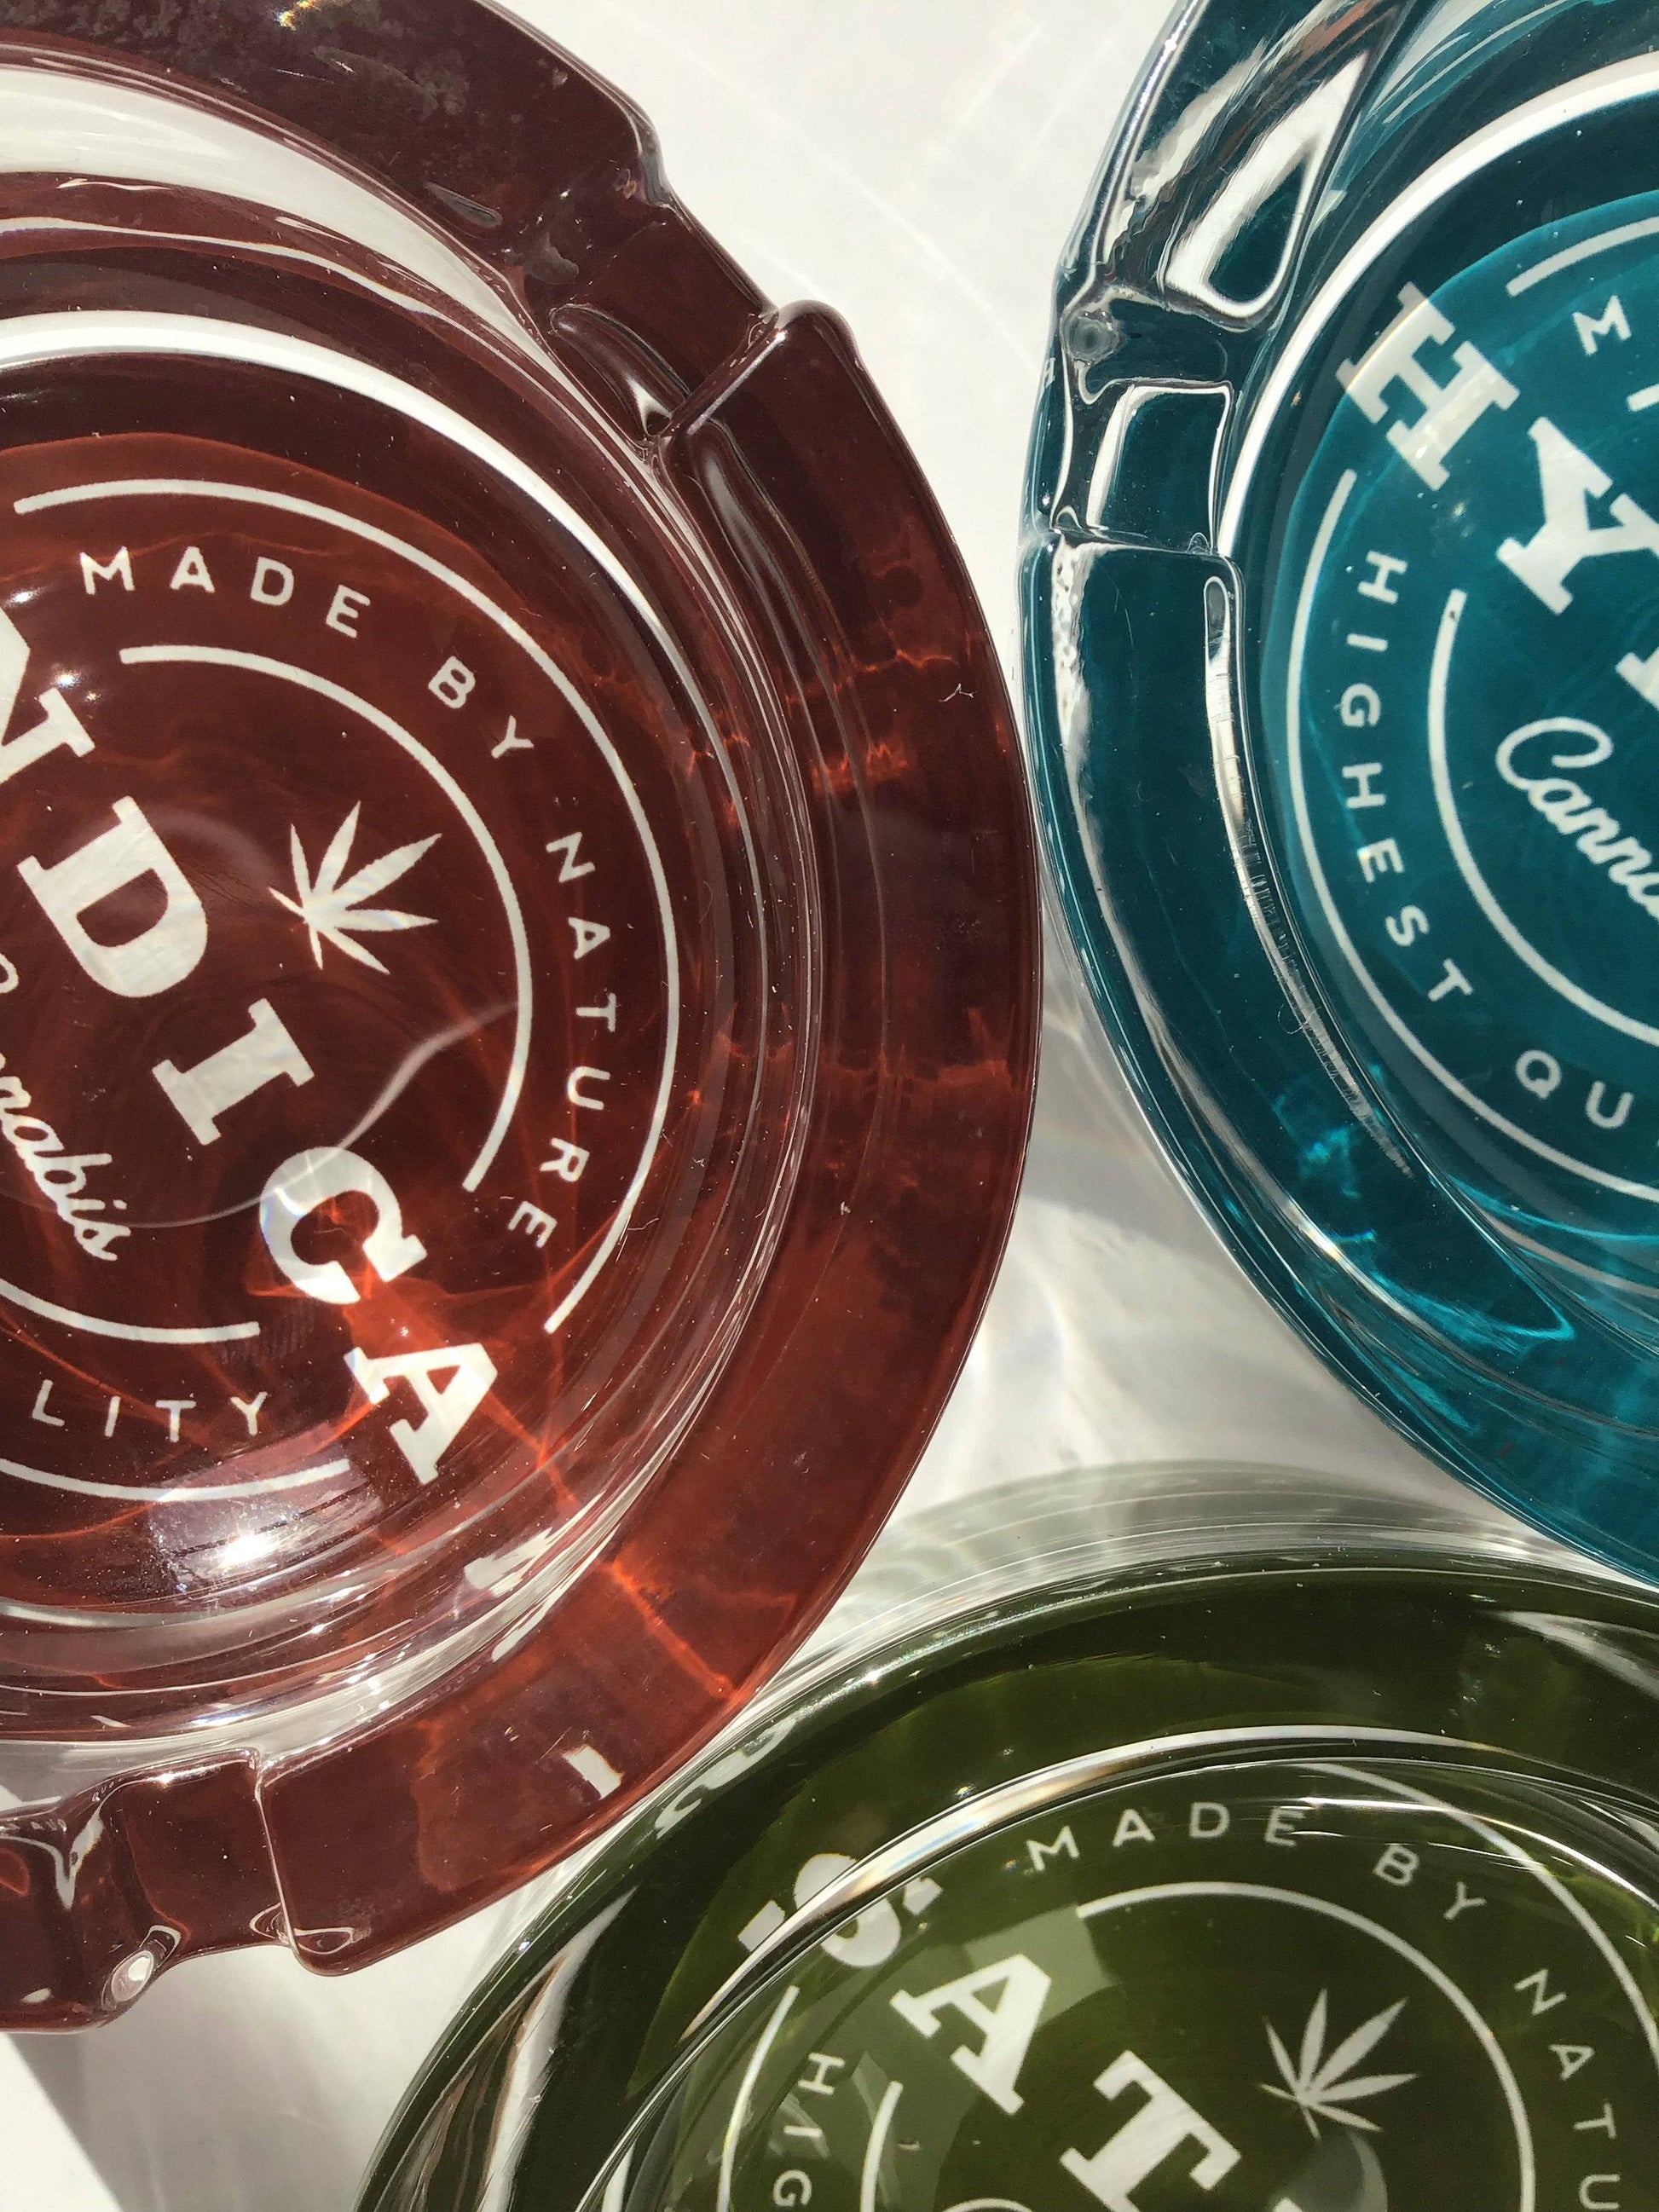 Indica Highest Quality Design Durable Glass Ashtray yoga smokes yoga studio, delivery, delivery near me, yoga smokes smoke shop, find smoke shop, head shop near me, yoga studio, headshop, head shop, local smoke shop, psl, psl smoke shop, smoke shop, smokeshop, yoga, yoga studio, dispensary, local dispensary, smokeshop near me, port saint lucie, florida, port st lucie, lounge, life, highlife, love, stoned, highsociety. Yoga Smokes